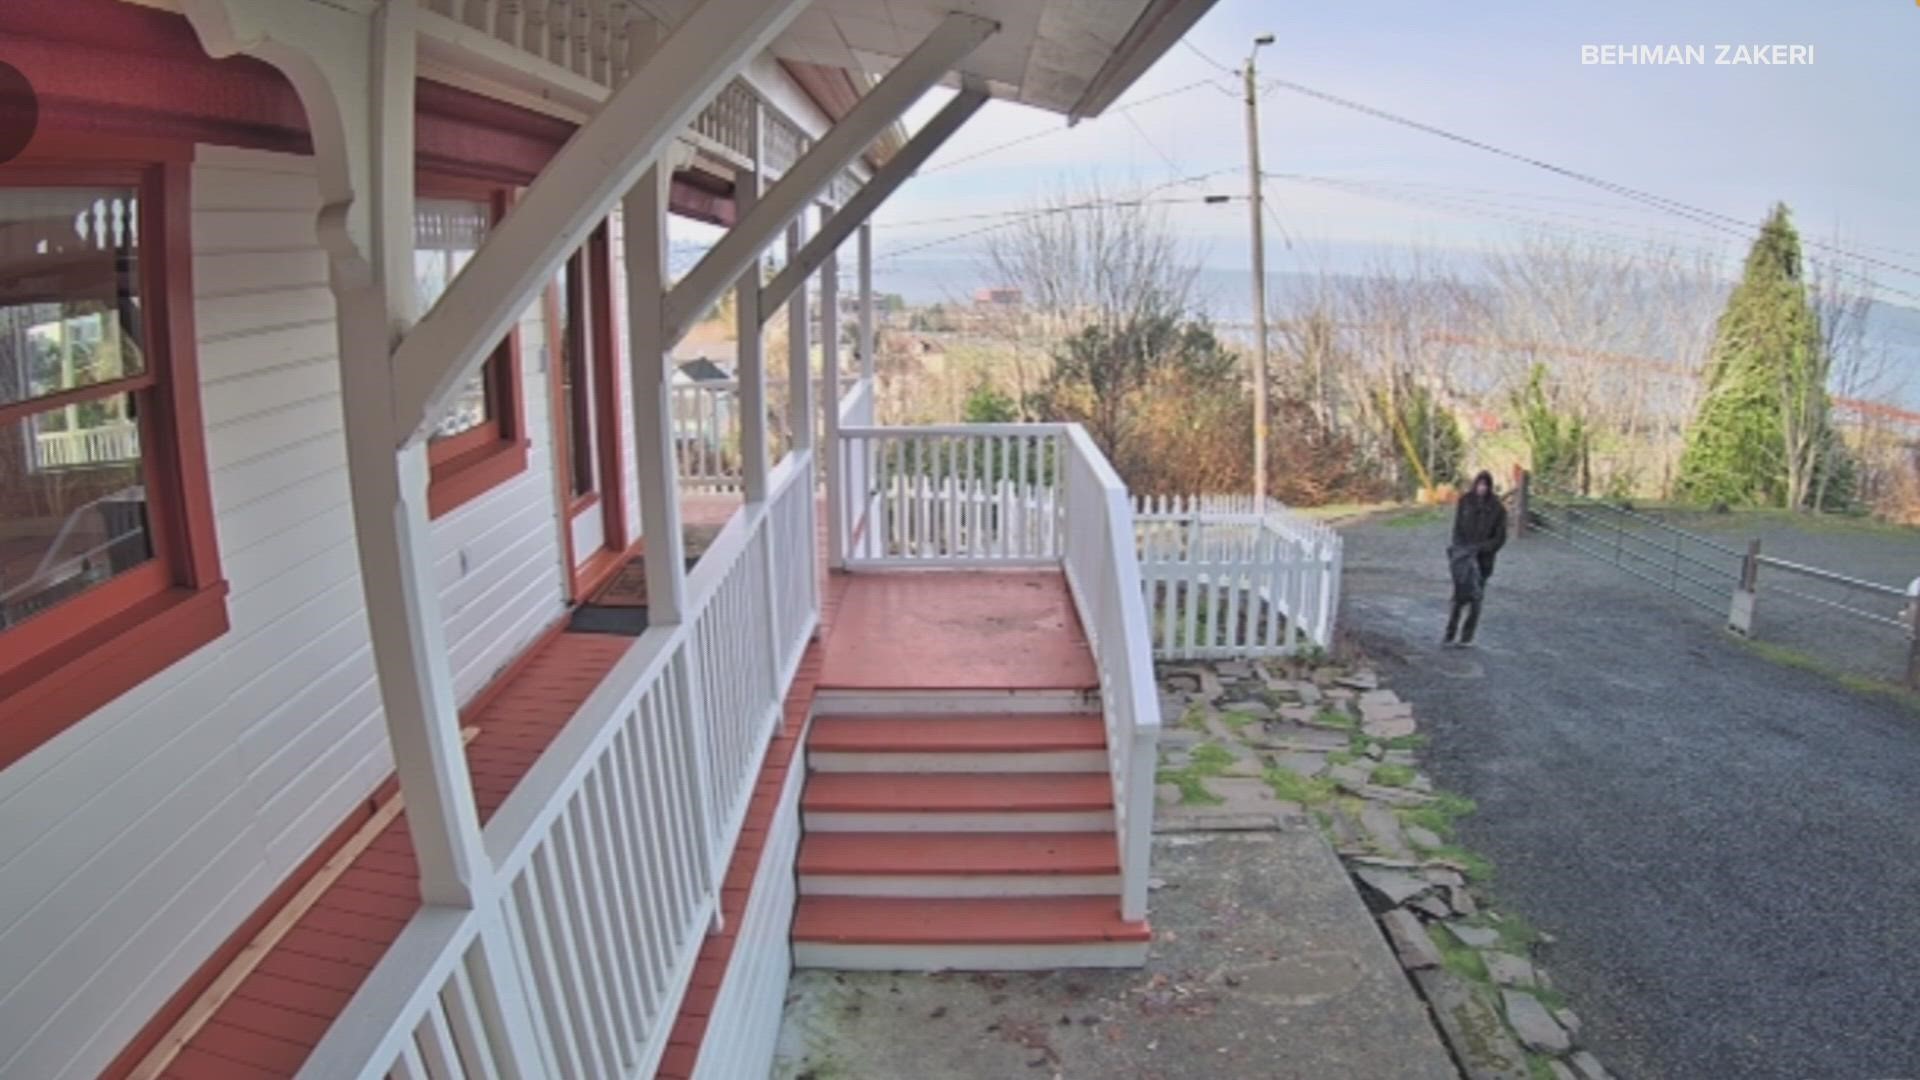 Camera caught a man walking up to the Goonies house in Astoria and placing a dead fish. Police say he also placed stickers over the camera lens outside the home.